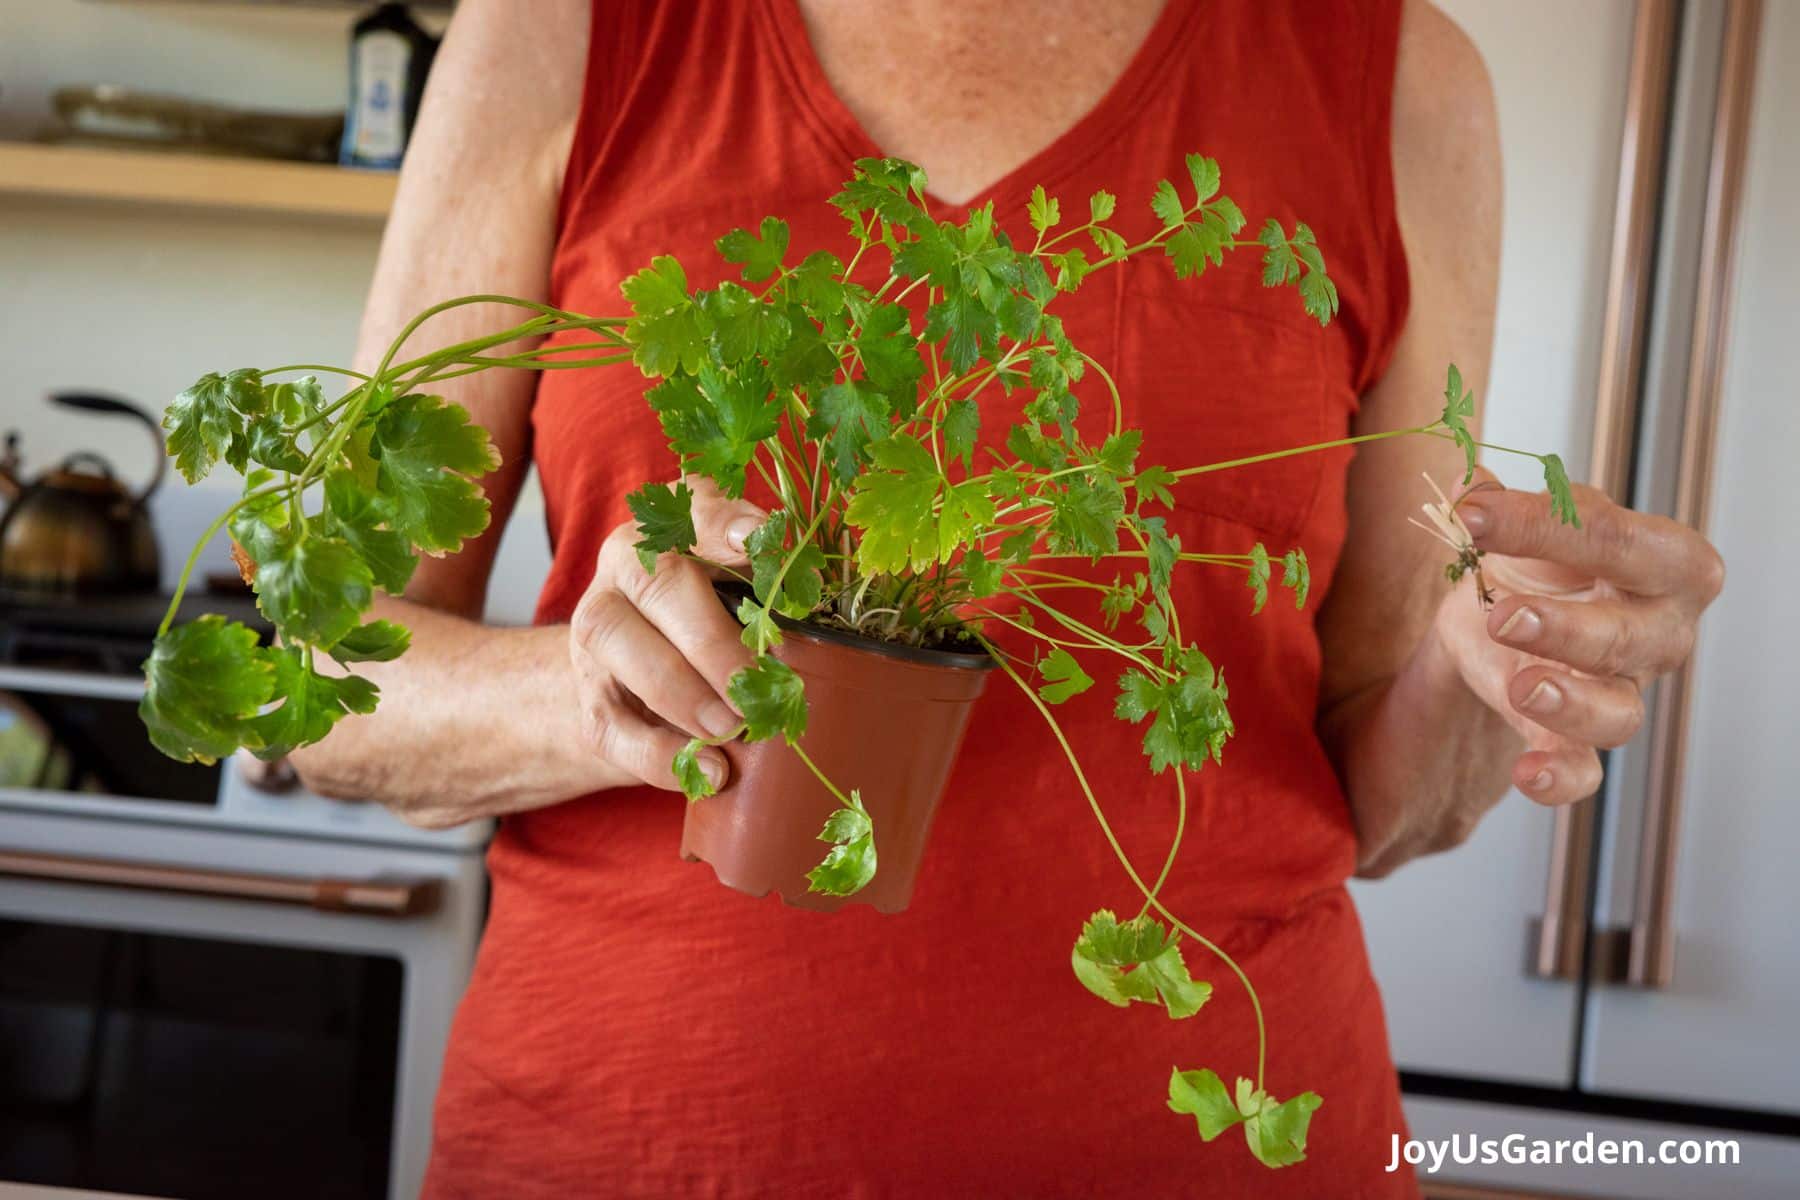 Woman in red top is holding an ailing parsley plant indoors in brightly lit kitchen.